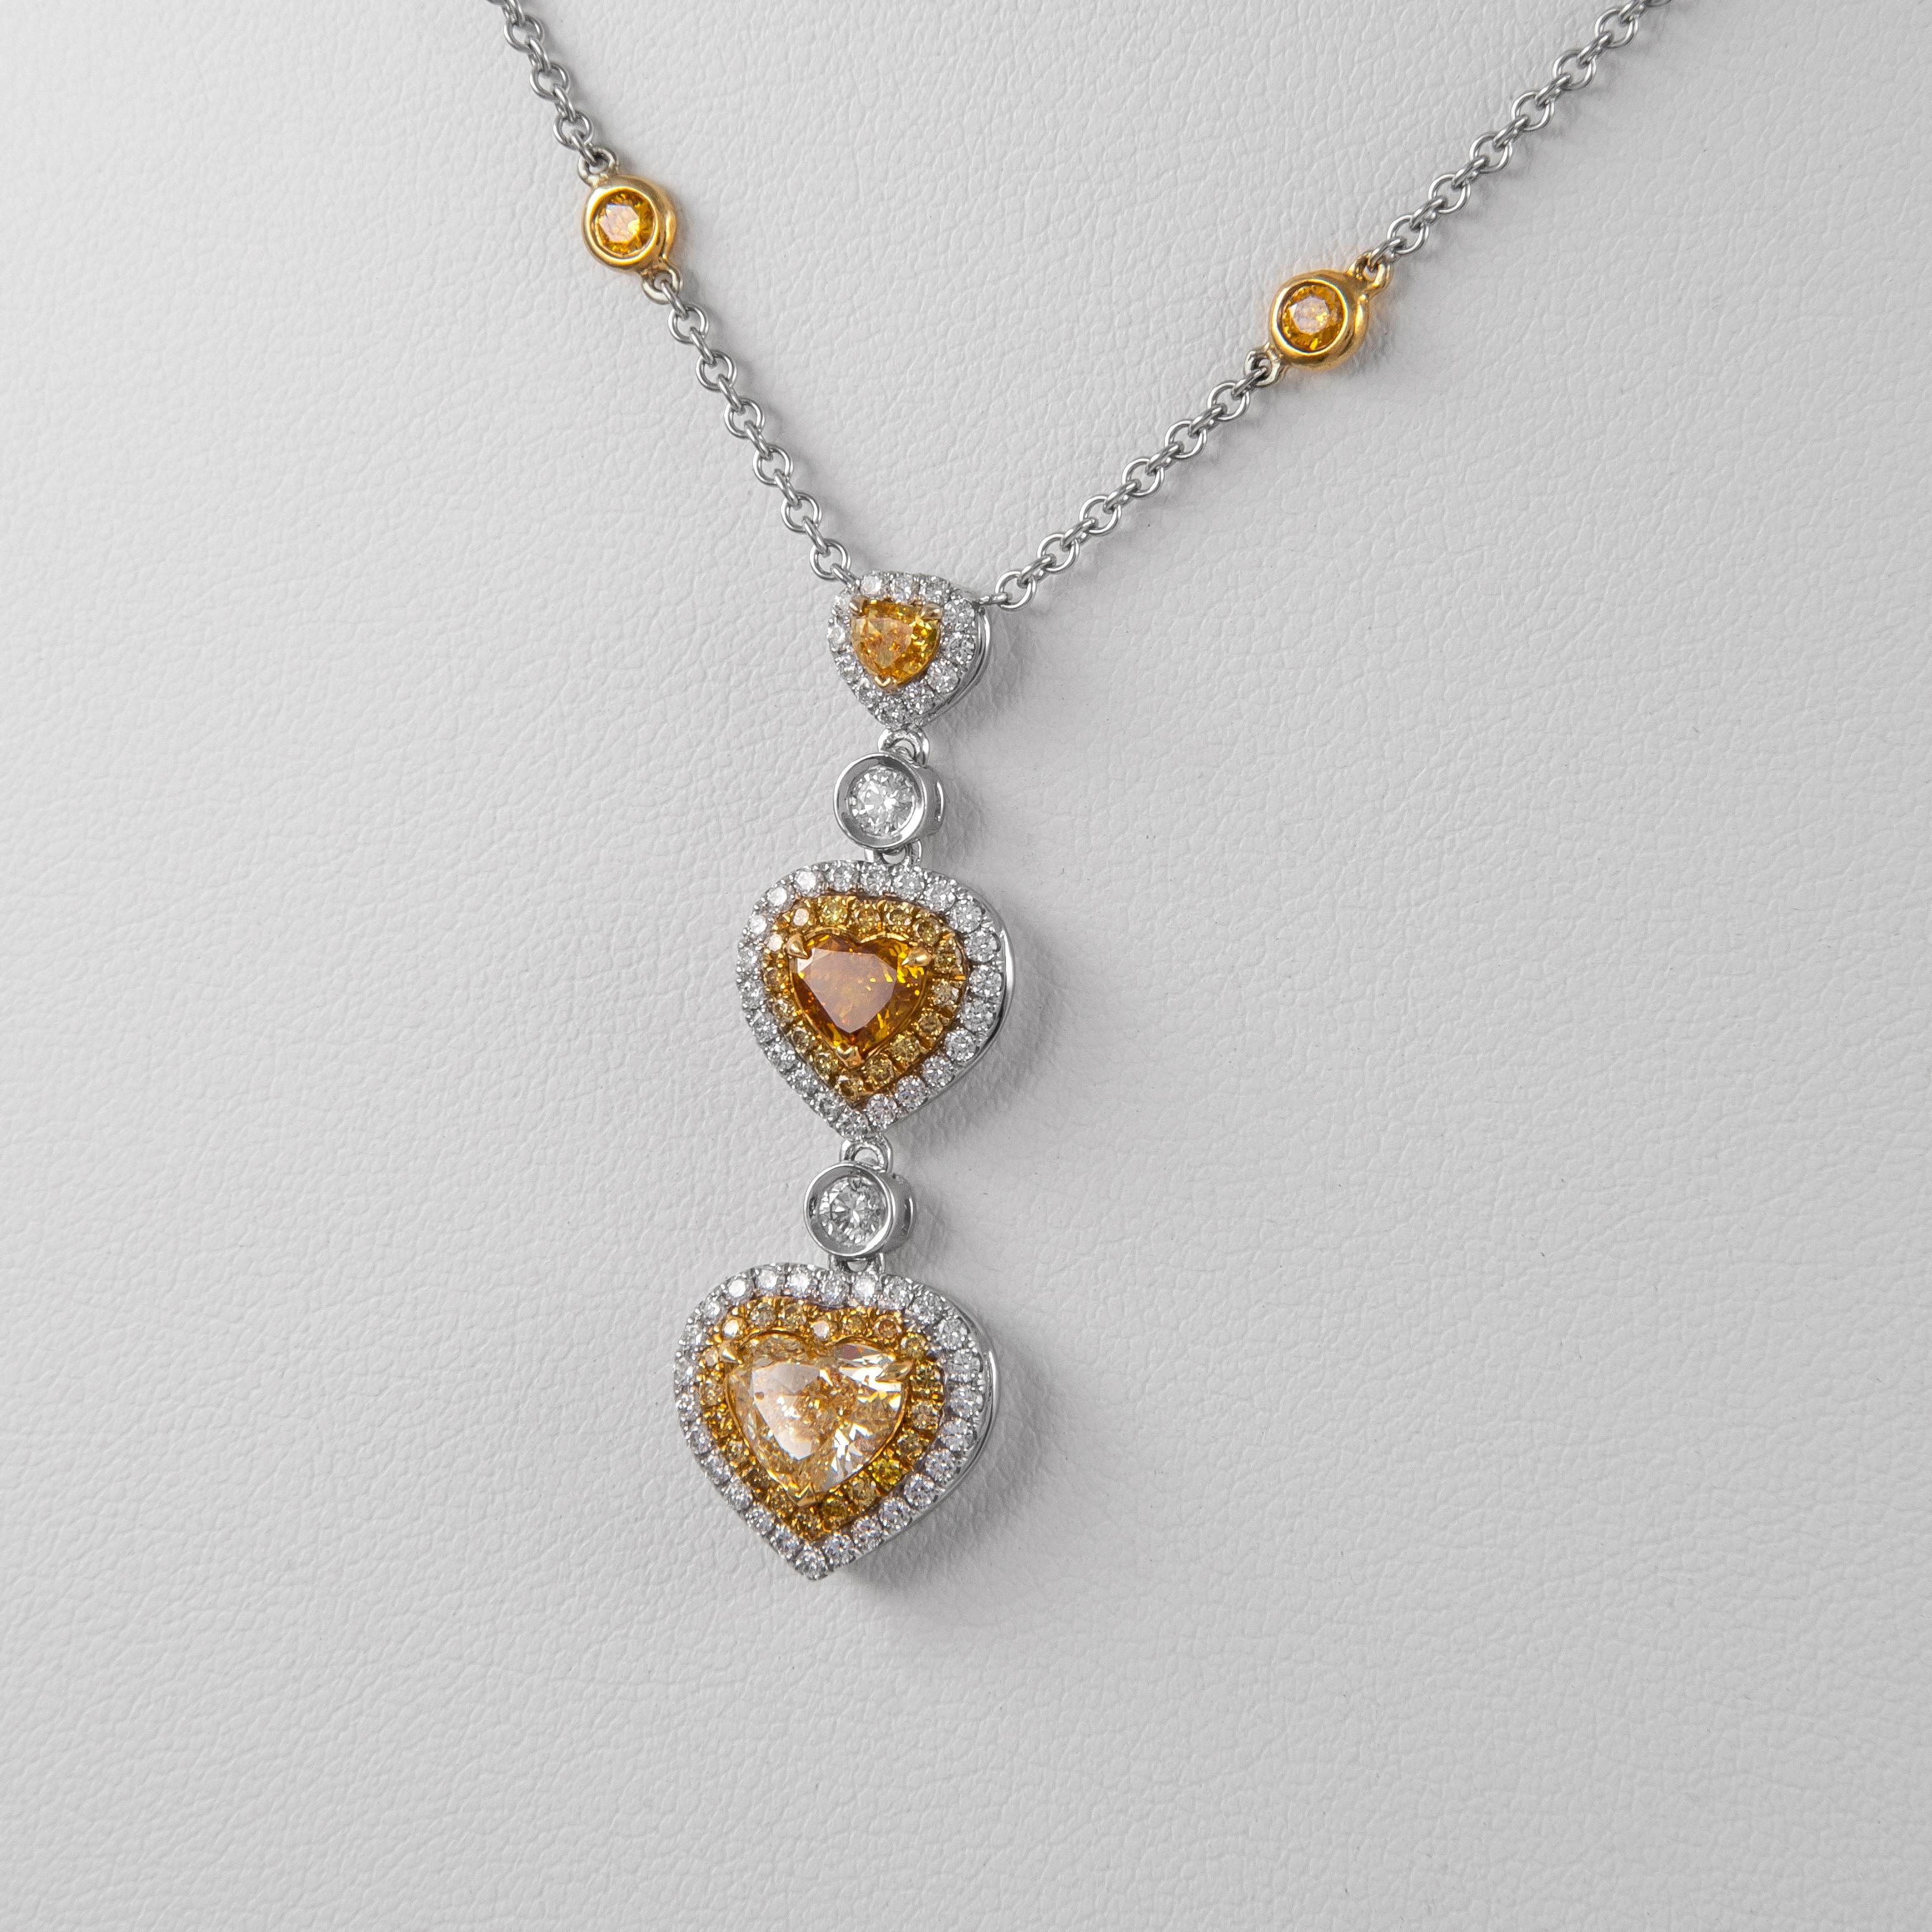 Alexander GIA 4.15ctt Fancy Color Diamond Drop Necklace 18k White & Yellow Gold In New Condition For Sale In BEVERLY HILLS, CA